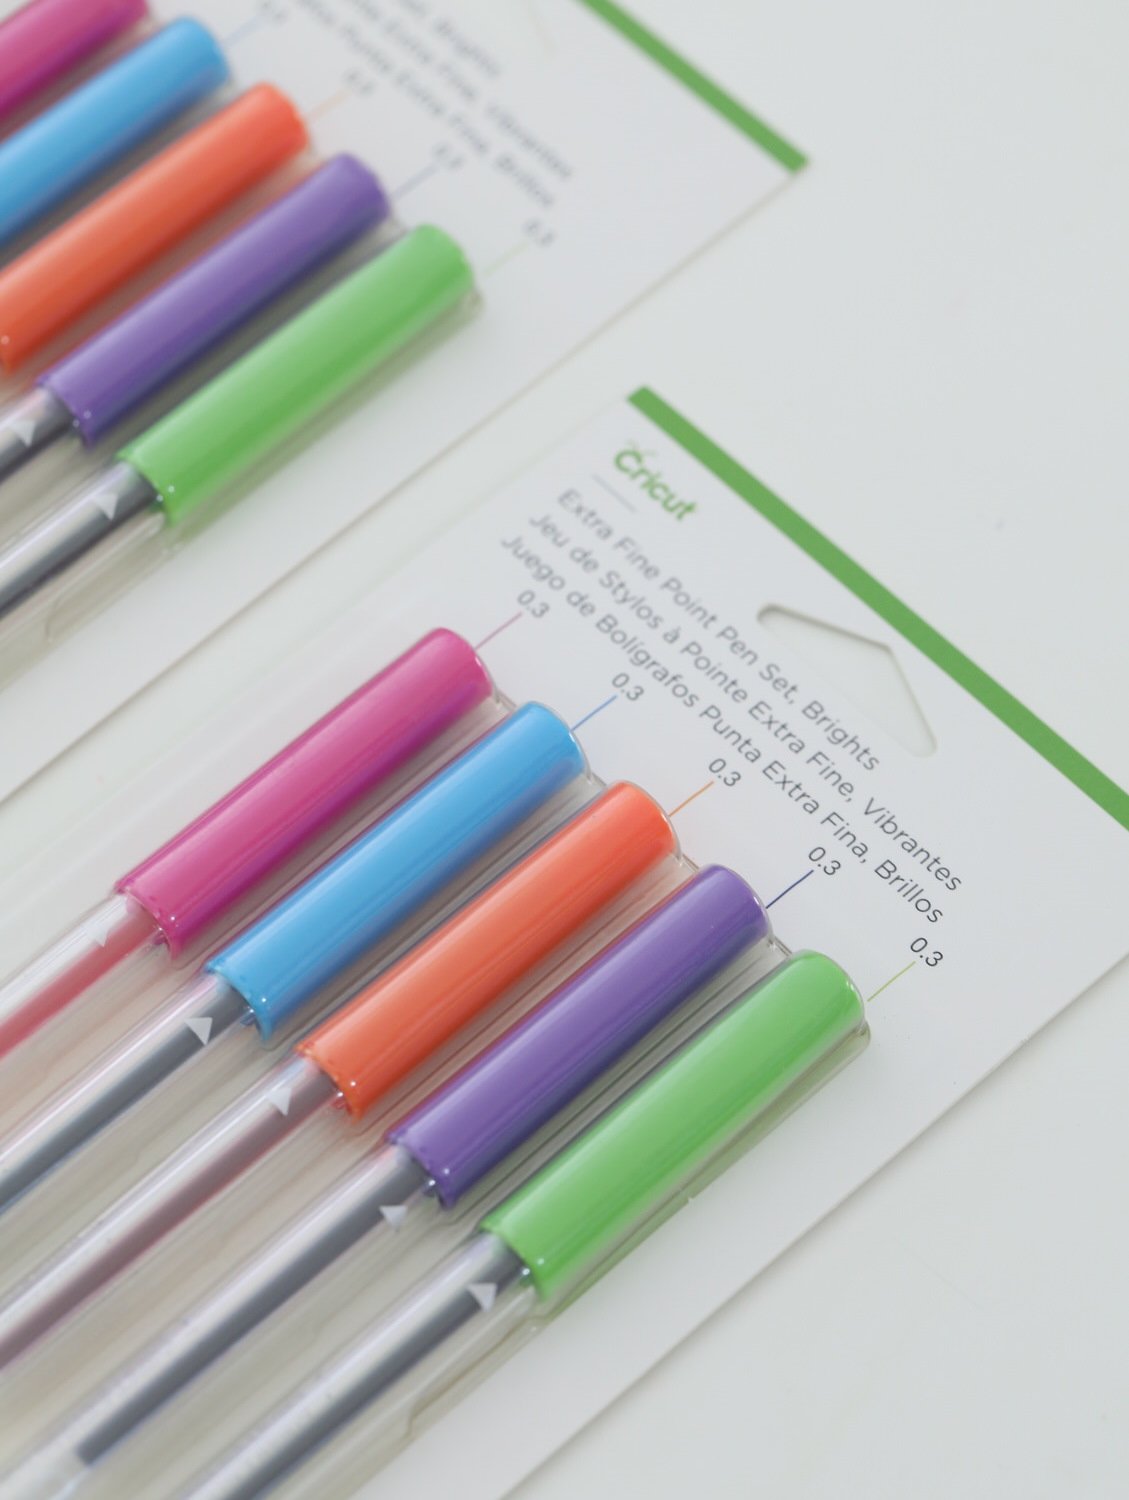 Cricut Extra Fine Point Pen Set (Brights) DIY Crafting & Hobby Store